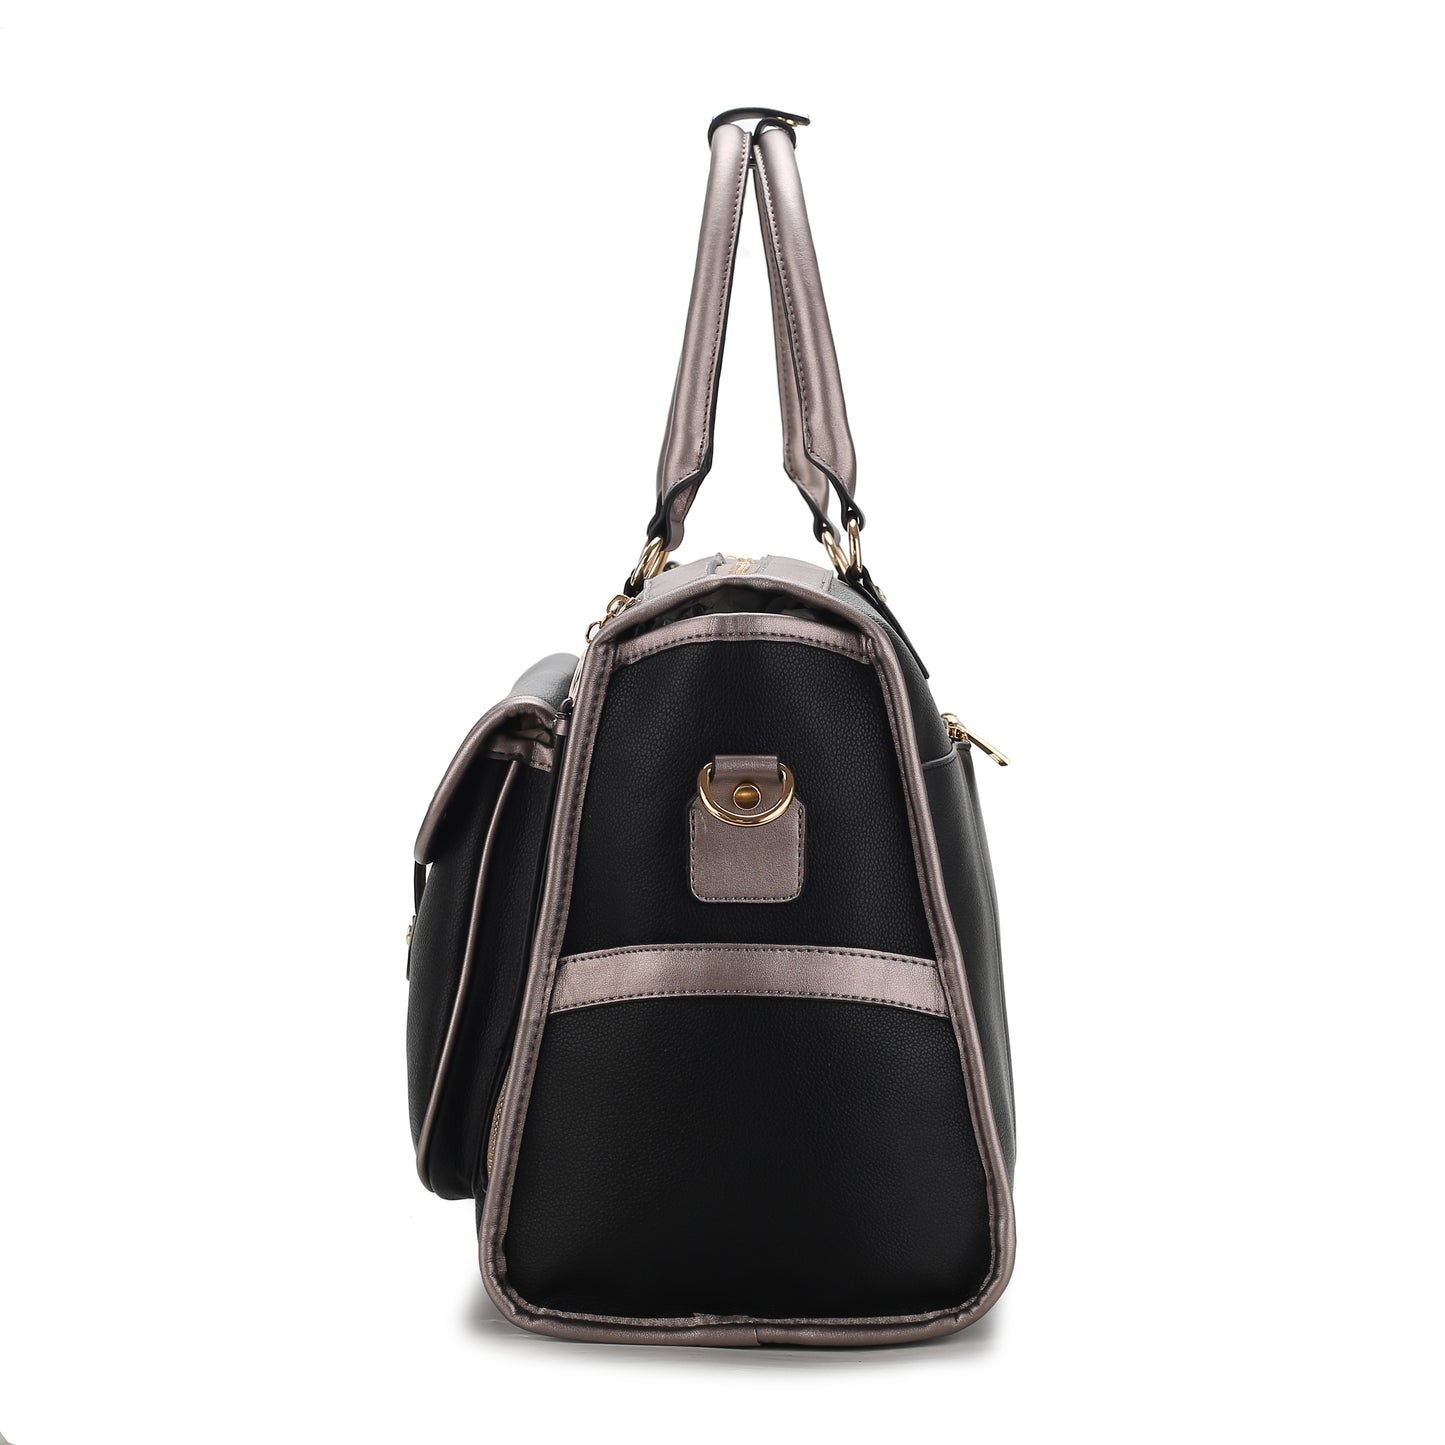 A black and silver Genevieve Duffle Handbag Color Block Vegan Leather Women designed for travel, featuring a convenient handle and a zippered pocket by Pink Orpheus.